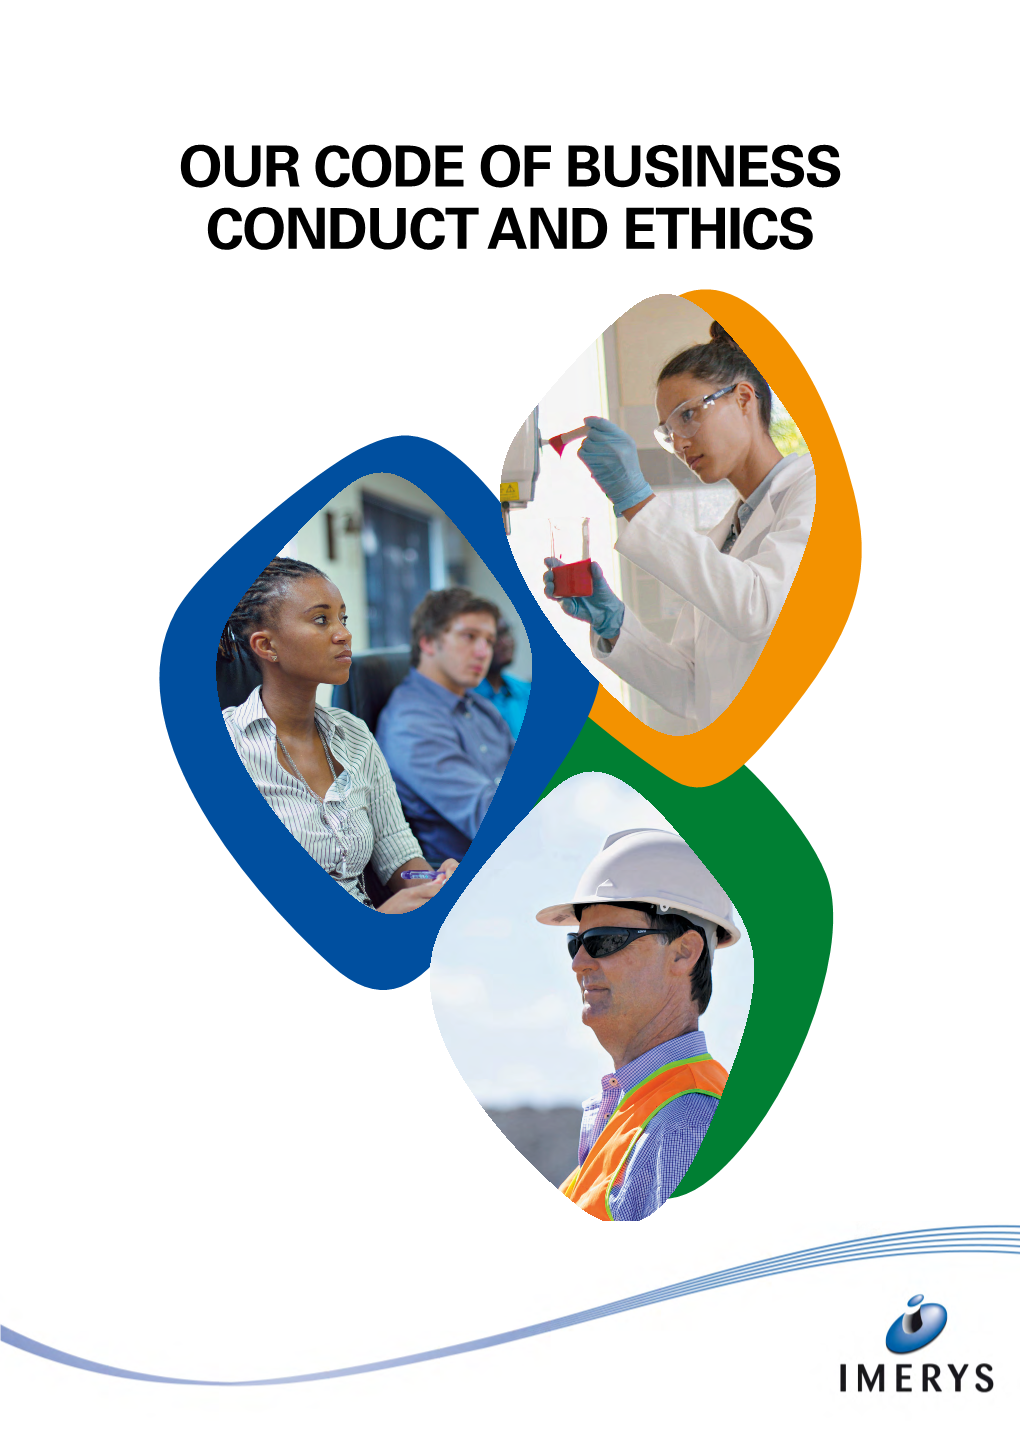 Our Code of Business Conduct and Ethics